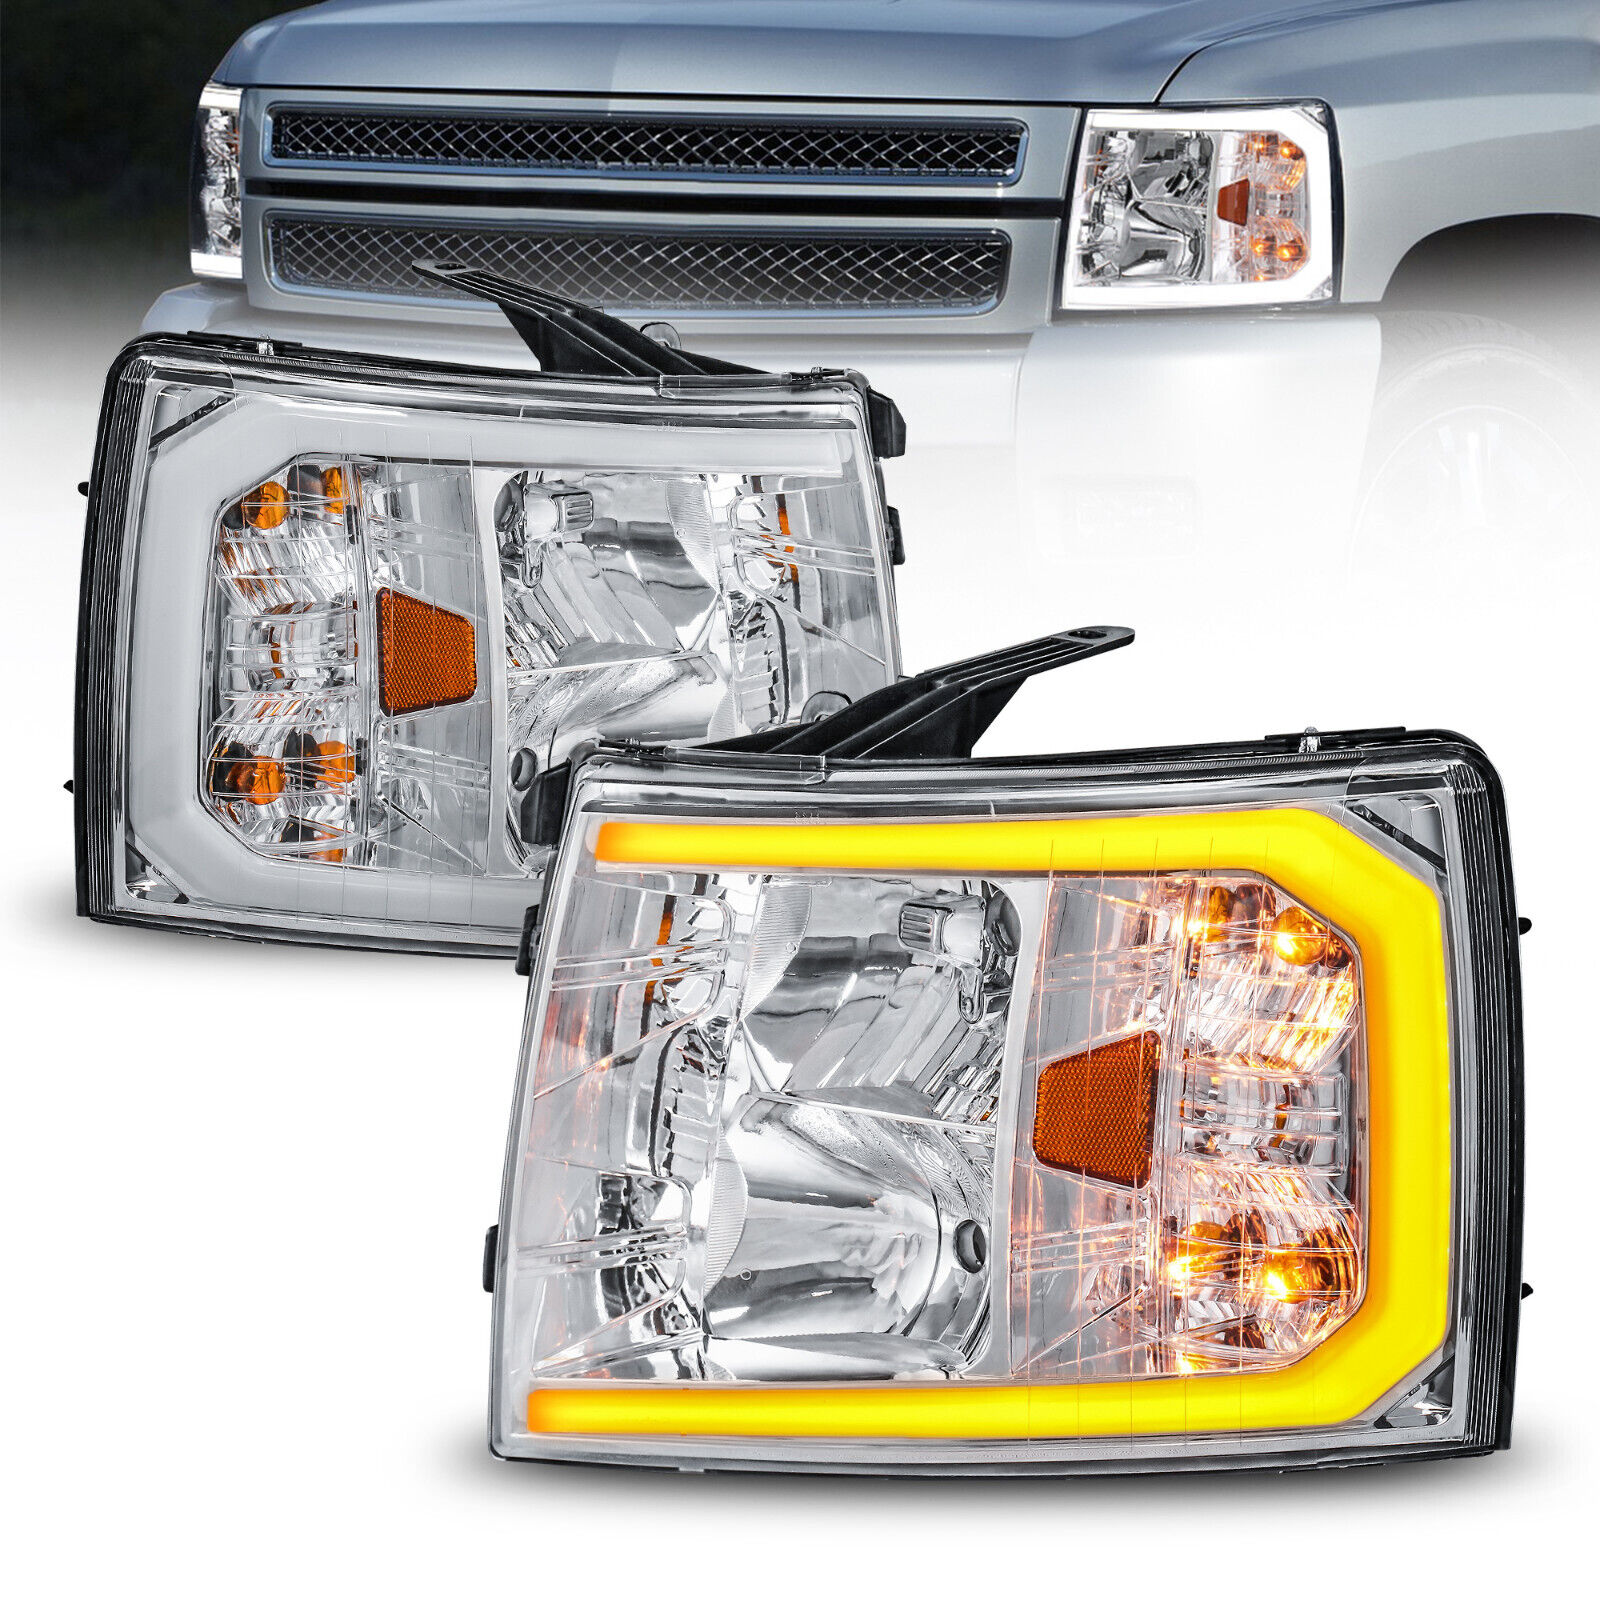 Set(2) LED DRL Headlight Assembly For 2007-2013 Chevy Silverado 1500 2500 3500HD